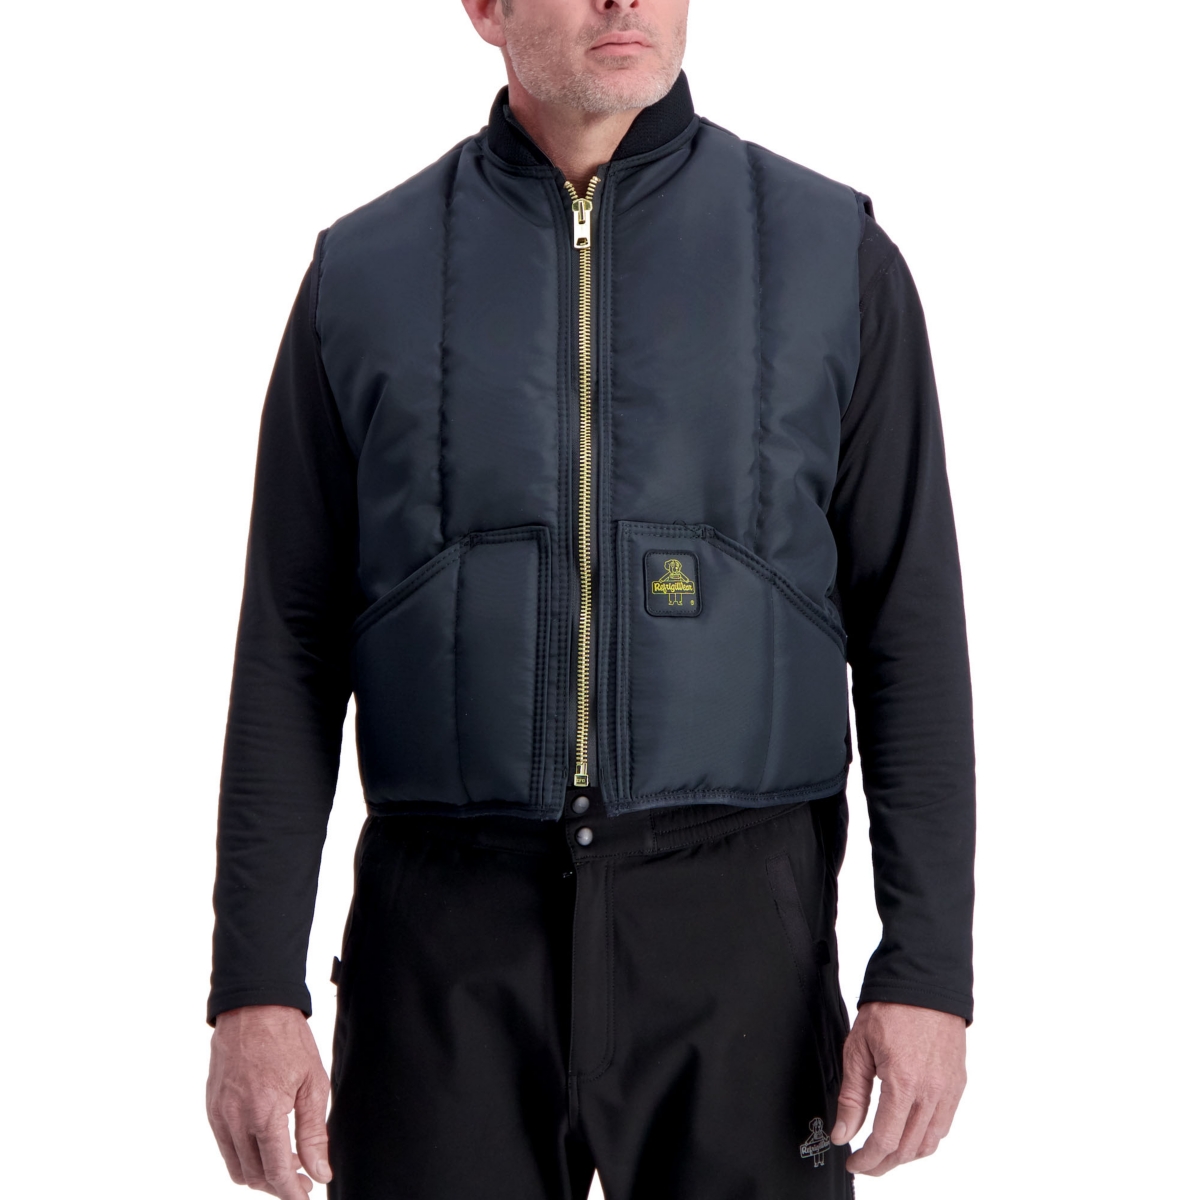 Big & Tall Iron-Tuff Water-Resistant Insulated Vest -50F Cold Protection - Navy